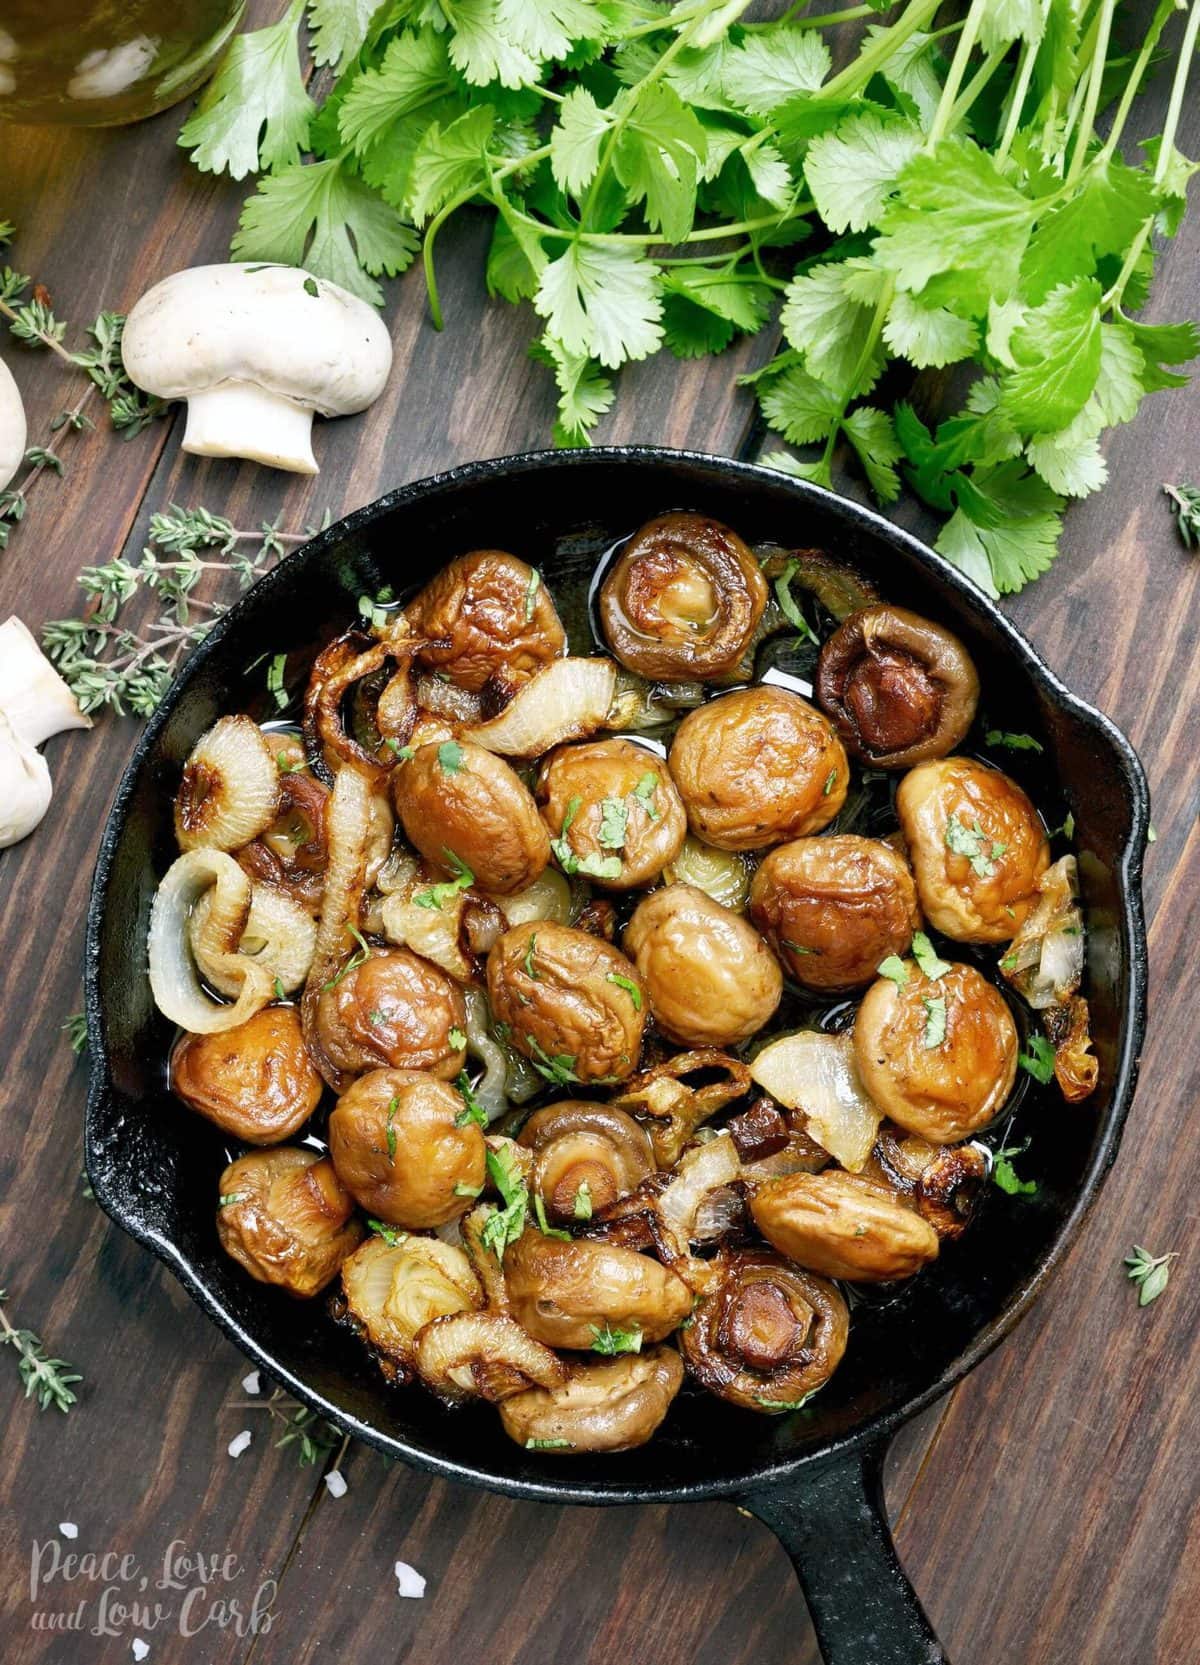 A cast iron skillet full of sautéed mushrooms and onions, garnished with parsley